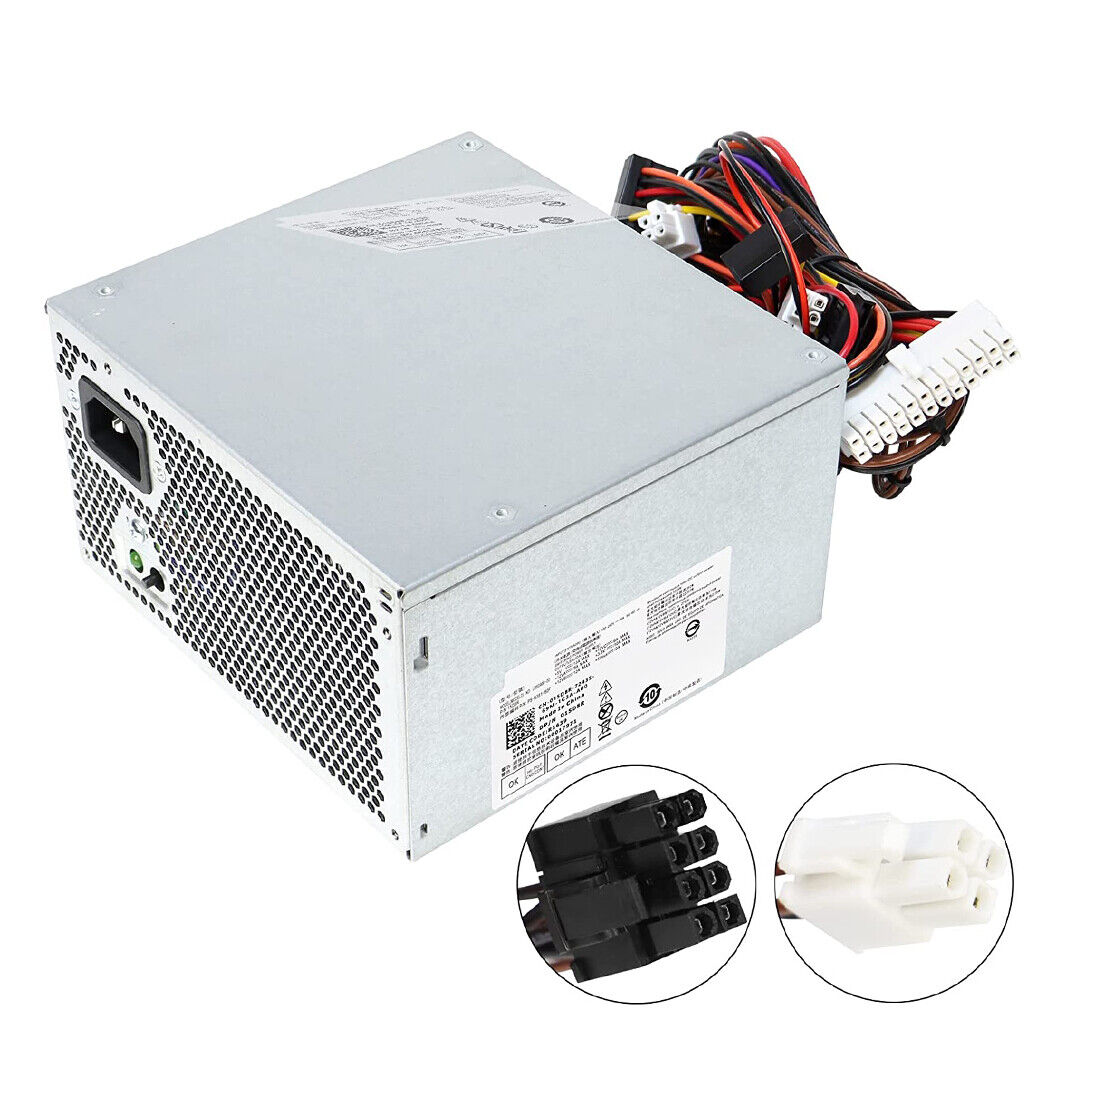 New 15D8R 015D8R 350W Power Supply For Dell XPS 8500 8700 9010MT 5675 5680 5676